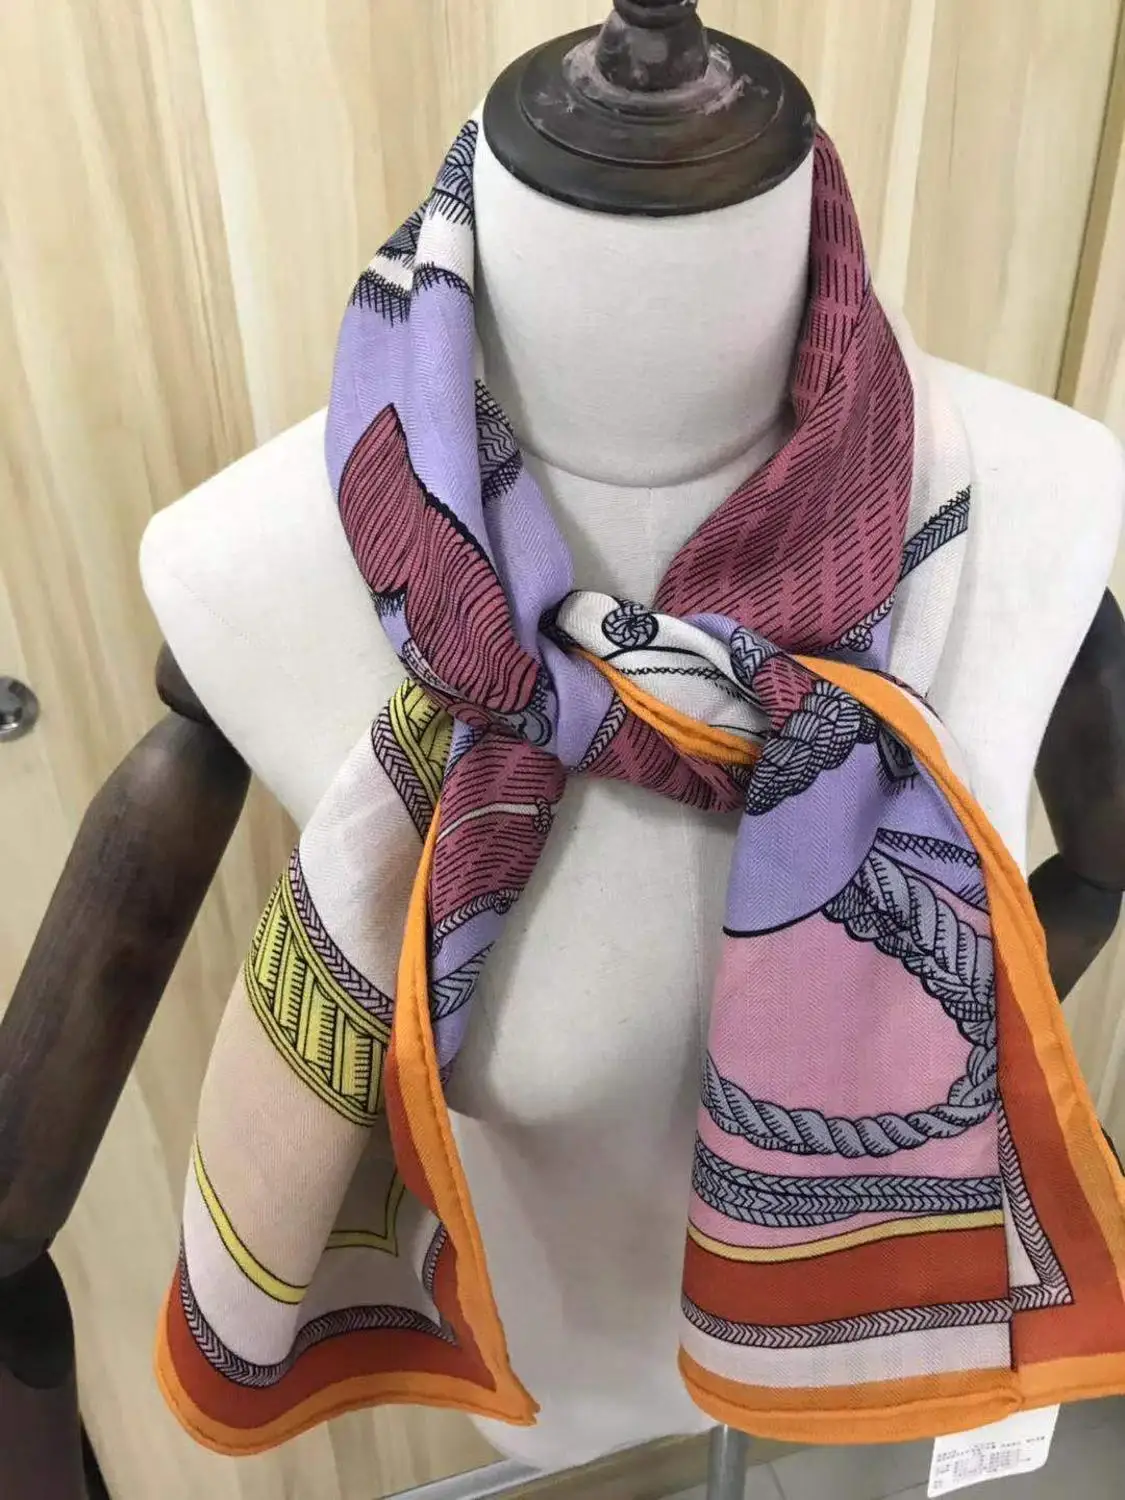 2020 new arrival autumn spring classic design 140*140 cm animal scarf 65% cashmere 35% silk scarf wrap for women lady girl